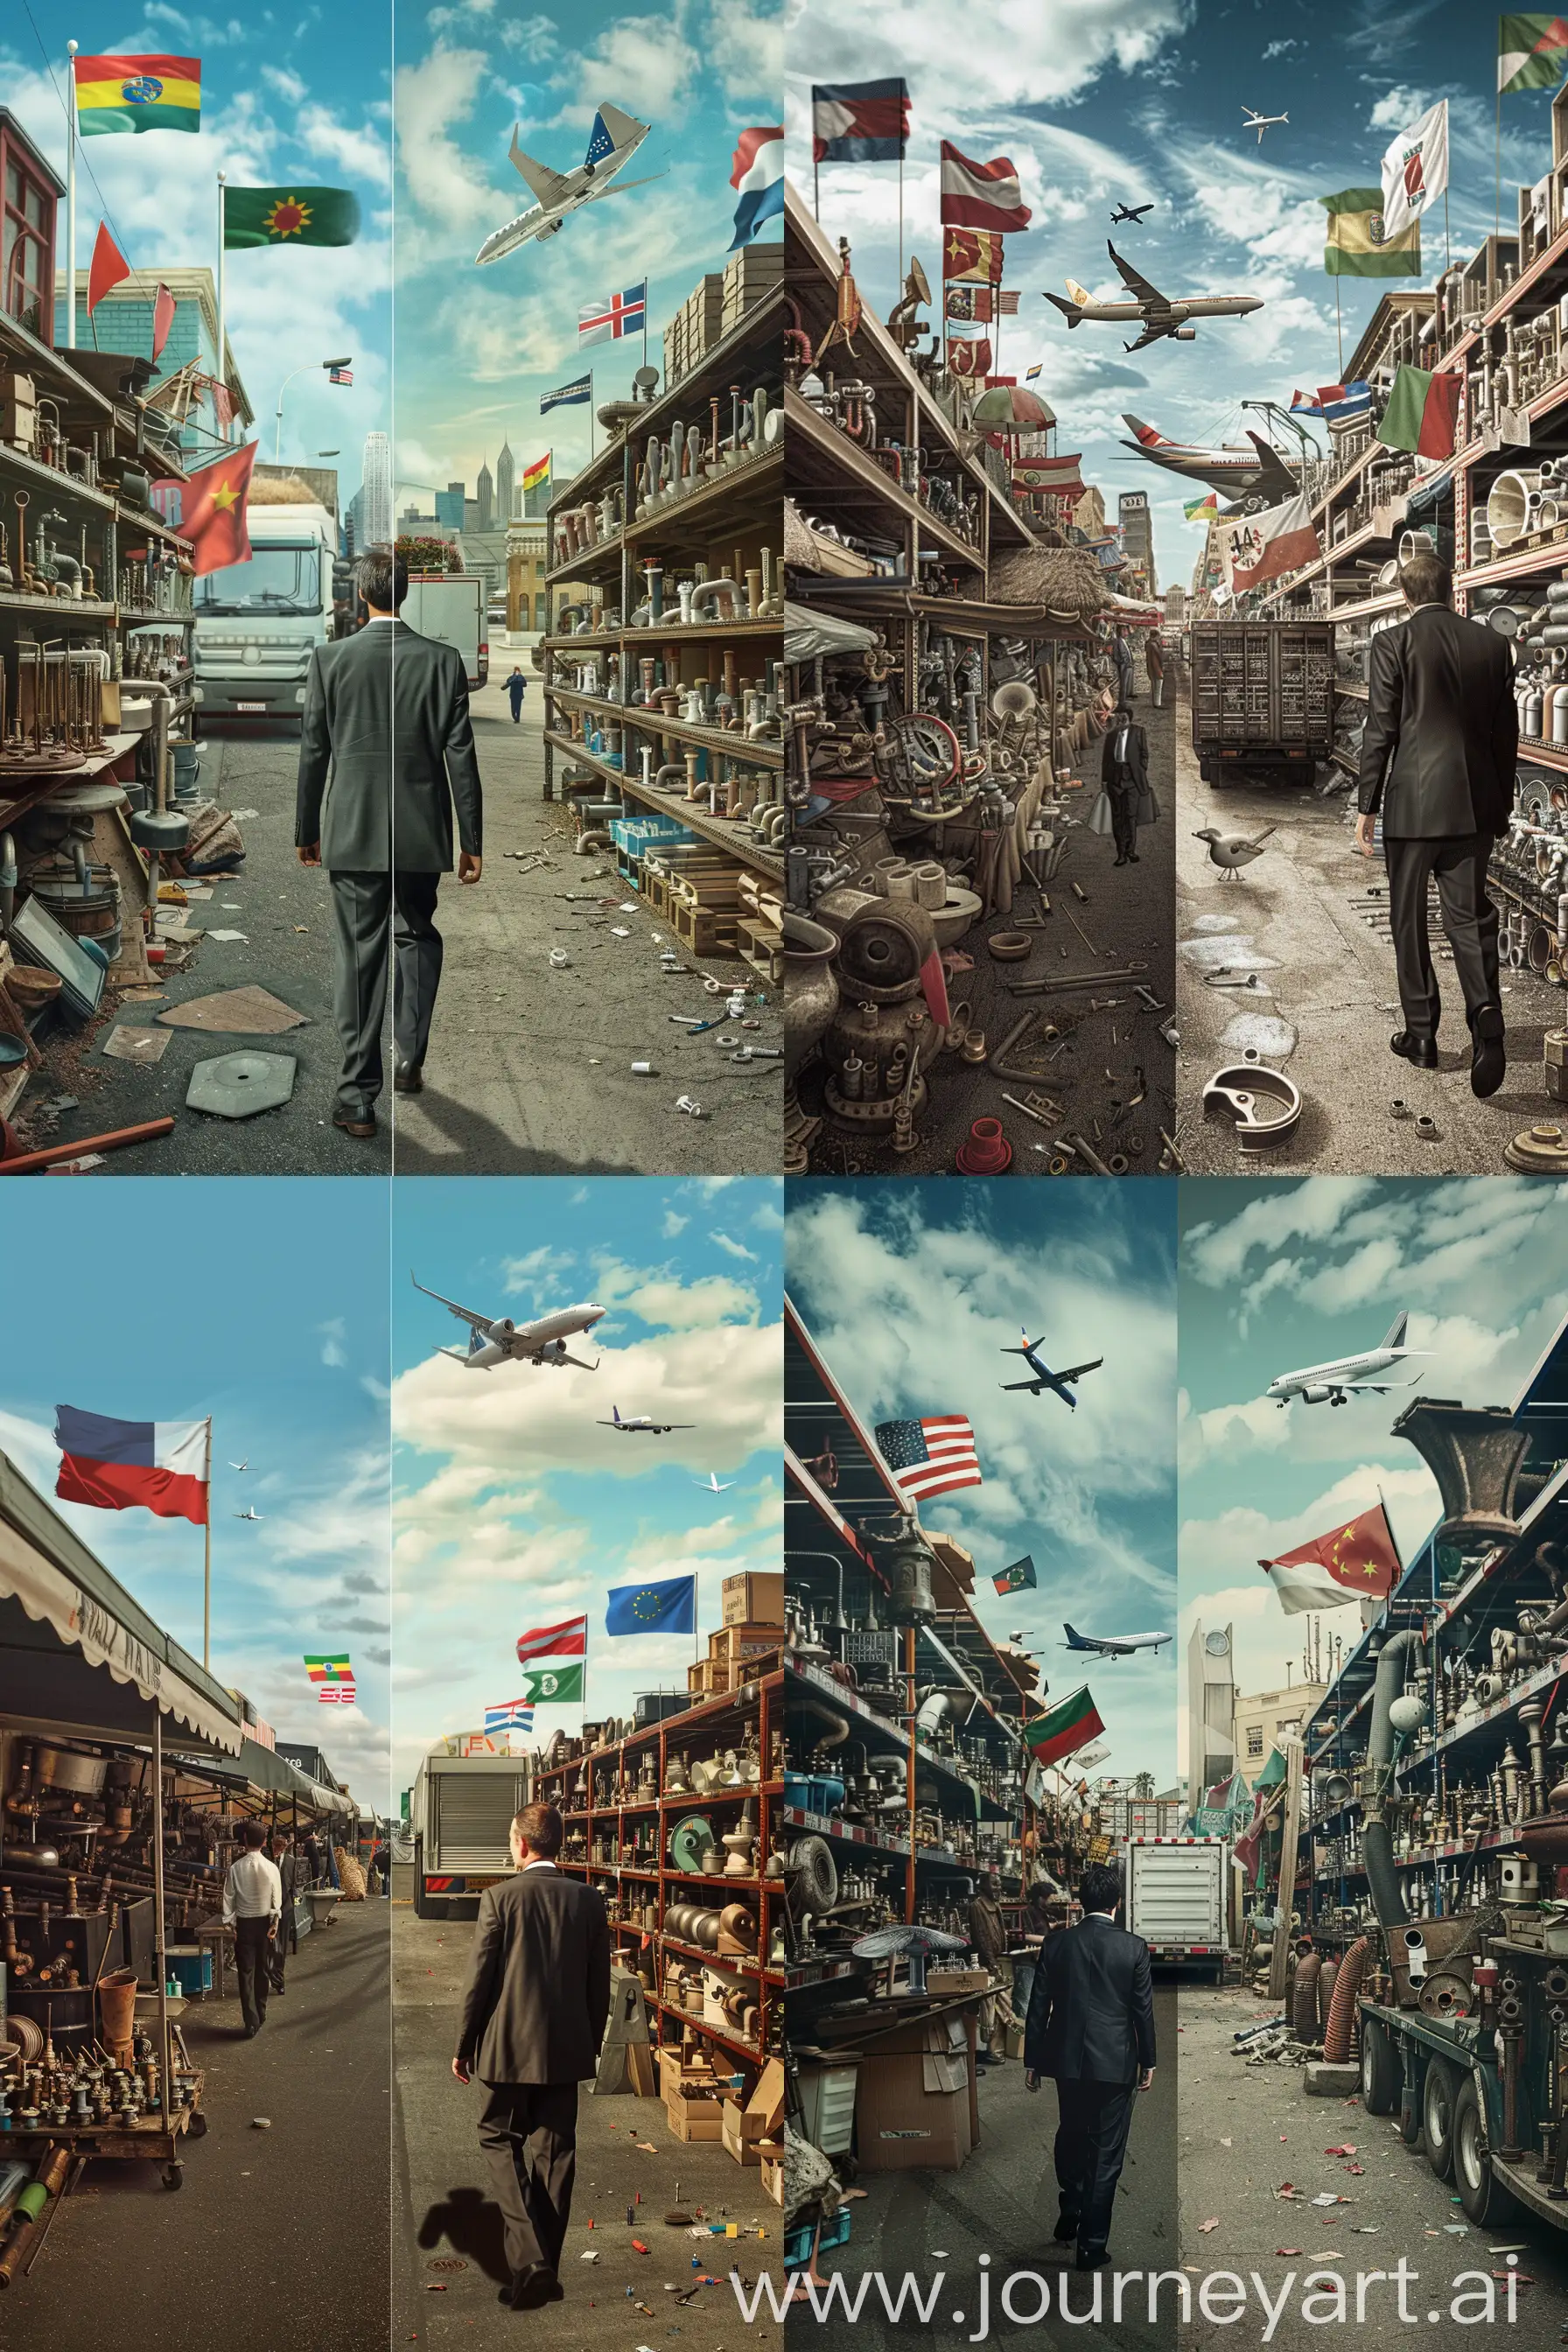 The image is divided into two parts vertically. A man in a suit is walking from left to right, there is a flea market on the left where sellers are selling old plumbing, and on the right is a paradise of automated plumbing warehouse where everything is neatly arranged on shelves and a truck is unloading to the warehouse, a plane is flying in the sky, and flags of countries are in the background --ar 4:6 --v 6